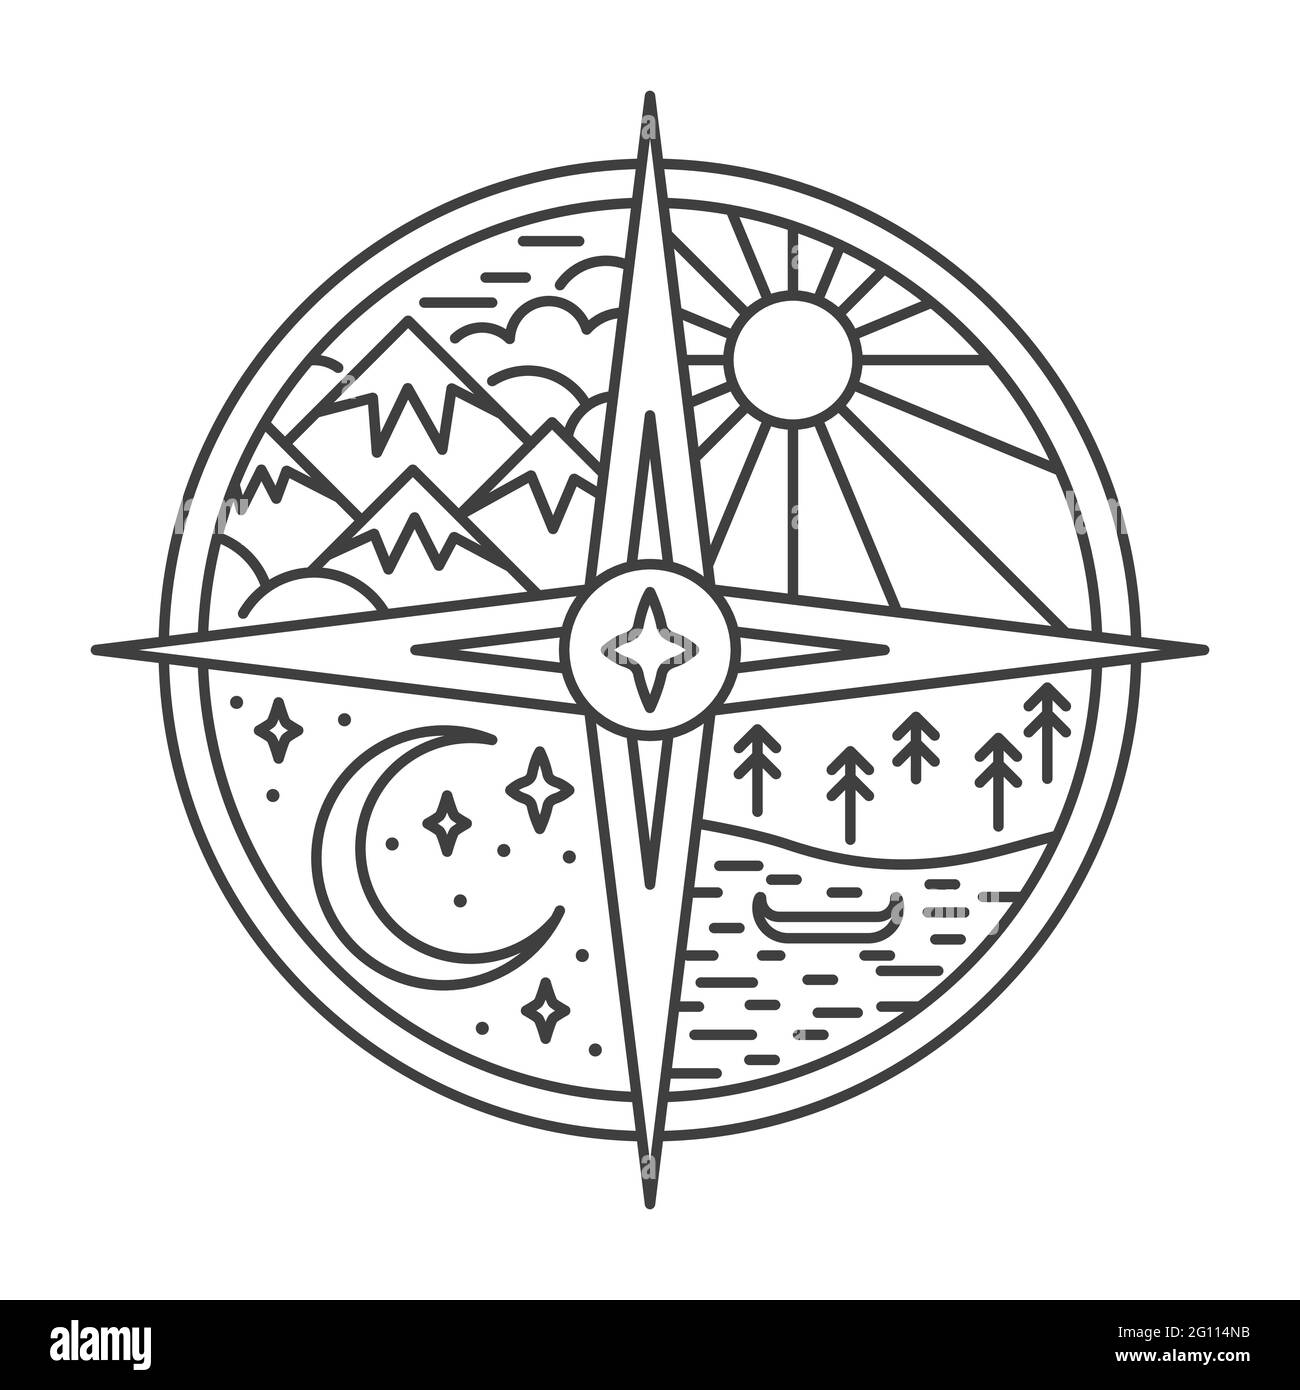 Compass line art Black and White Stock Photos & Images - Alamy